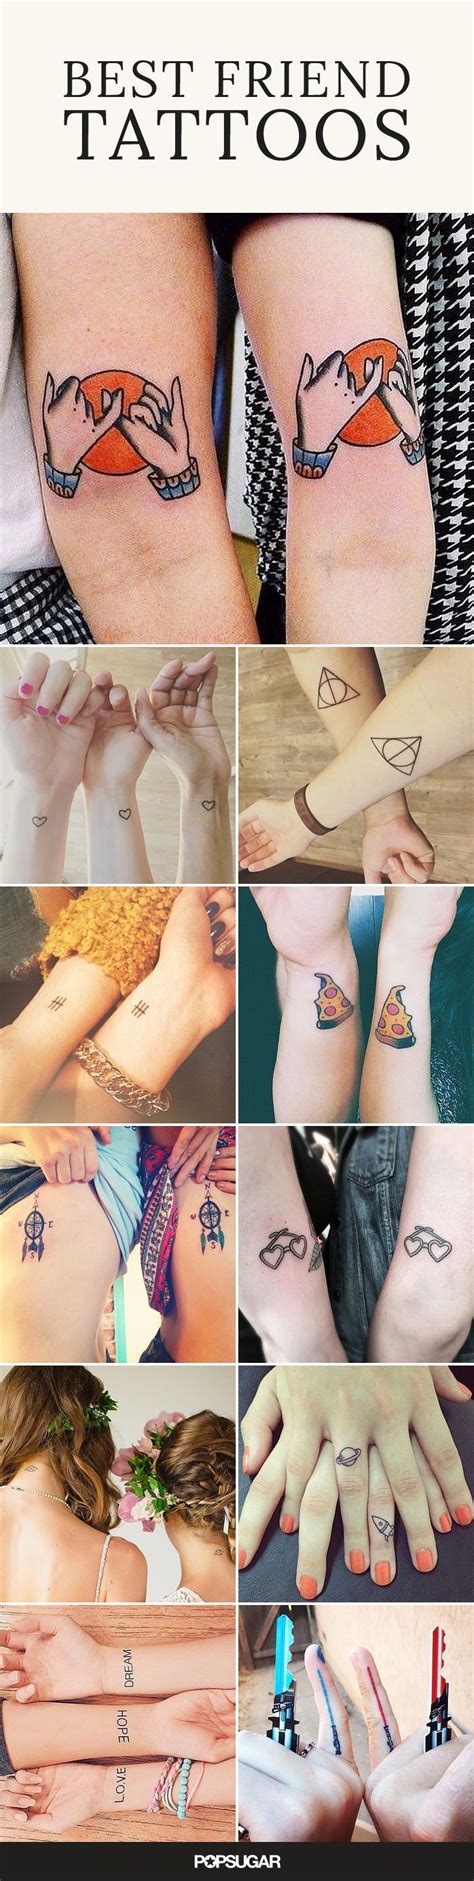 80 creative tattoos you ll want to get with your best friend creative tattoos tattoos